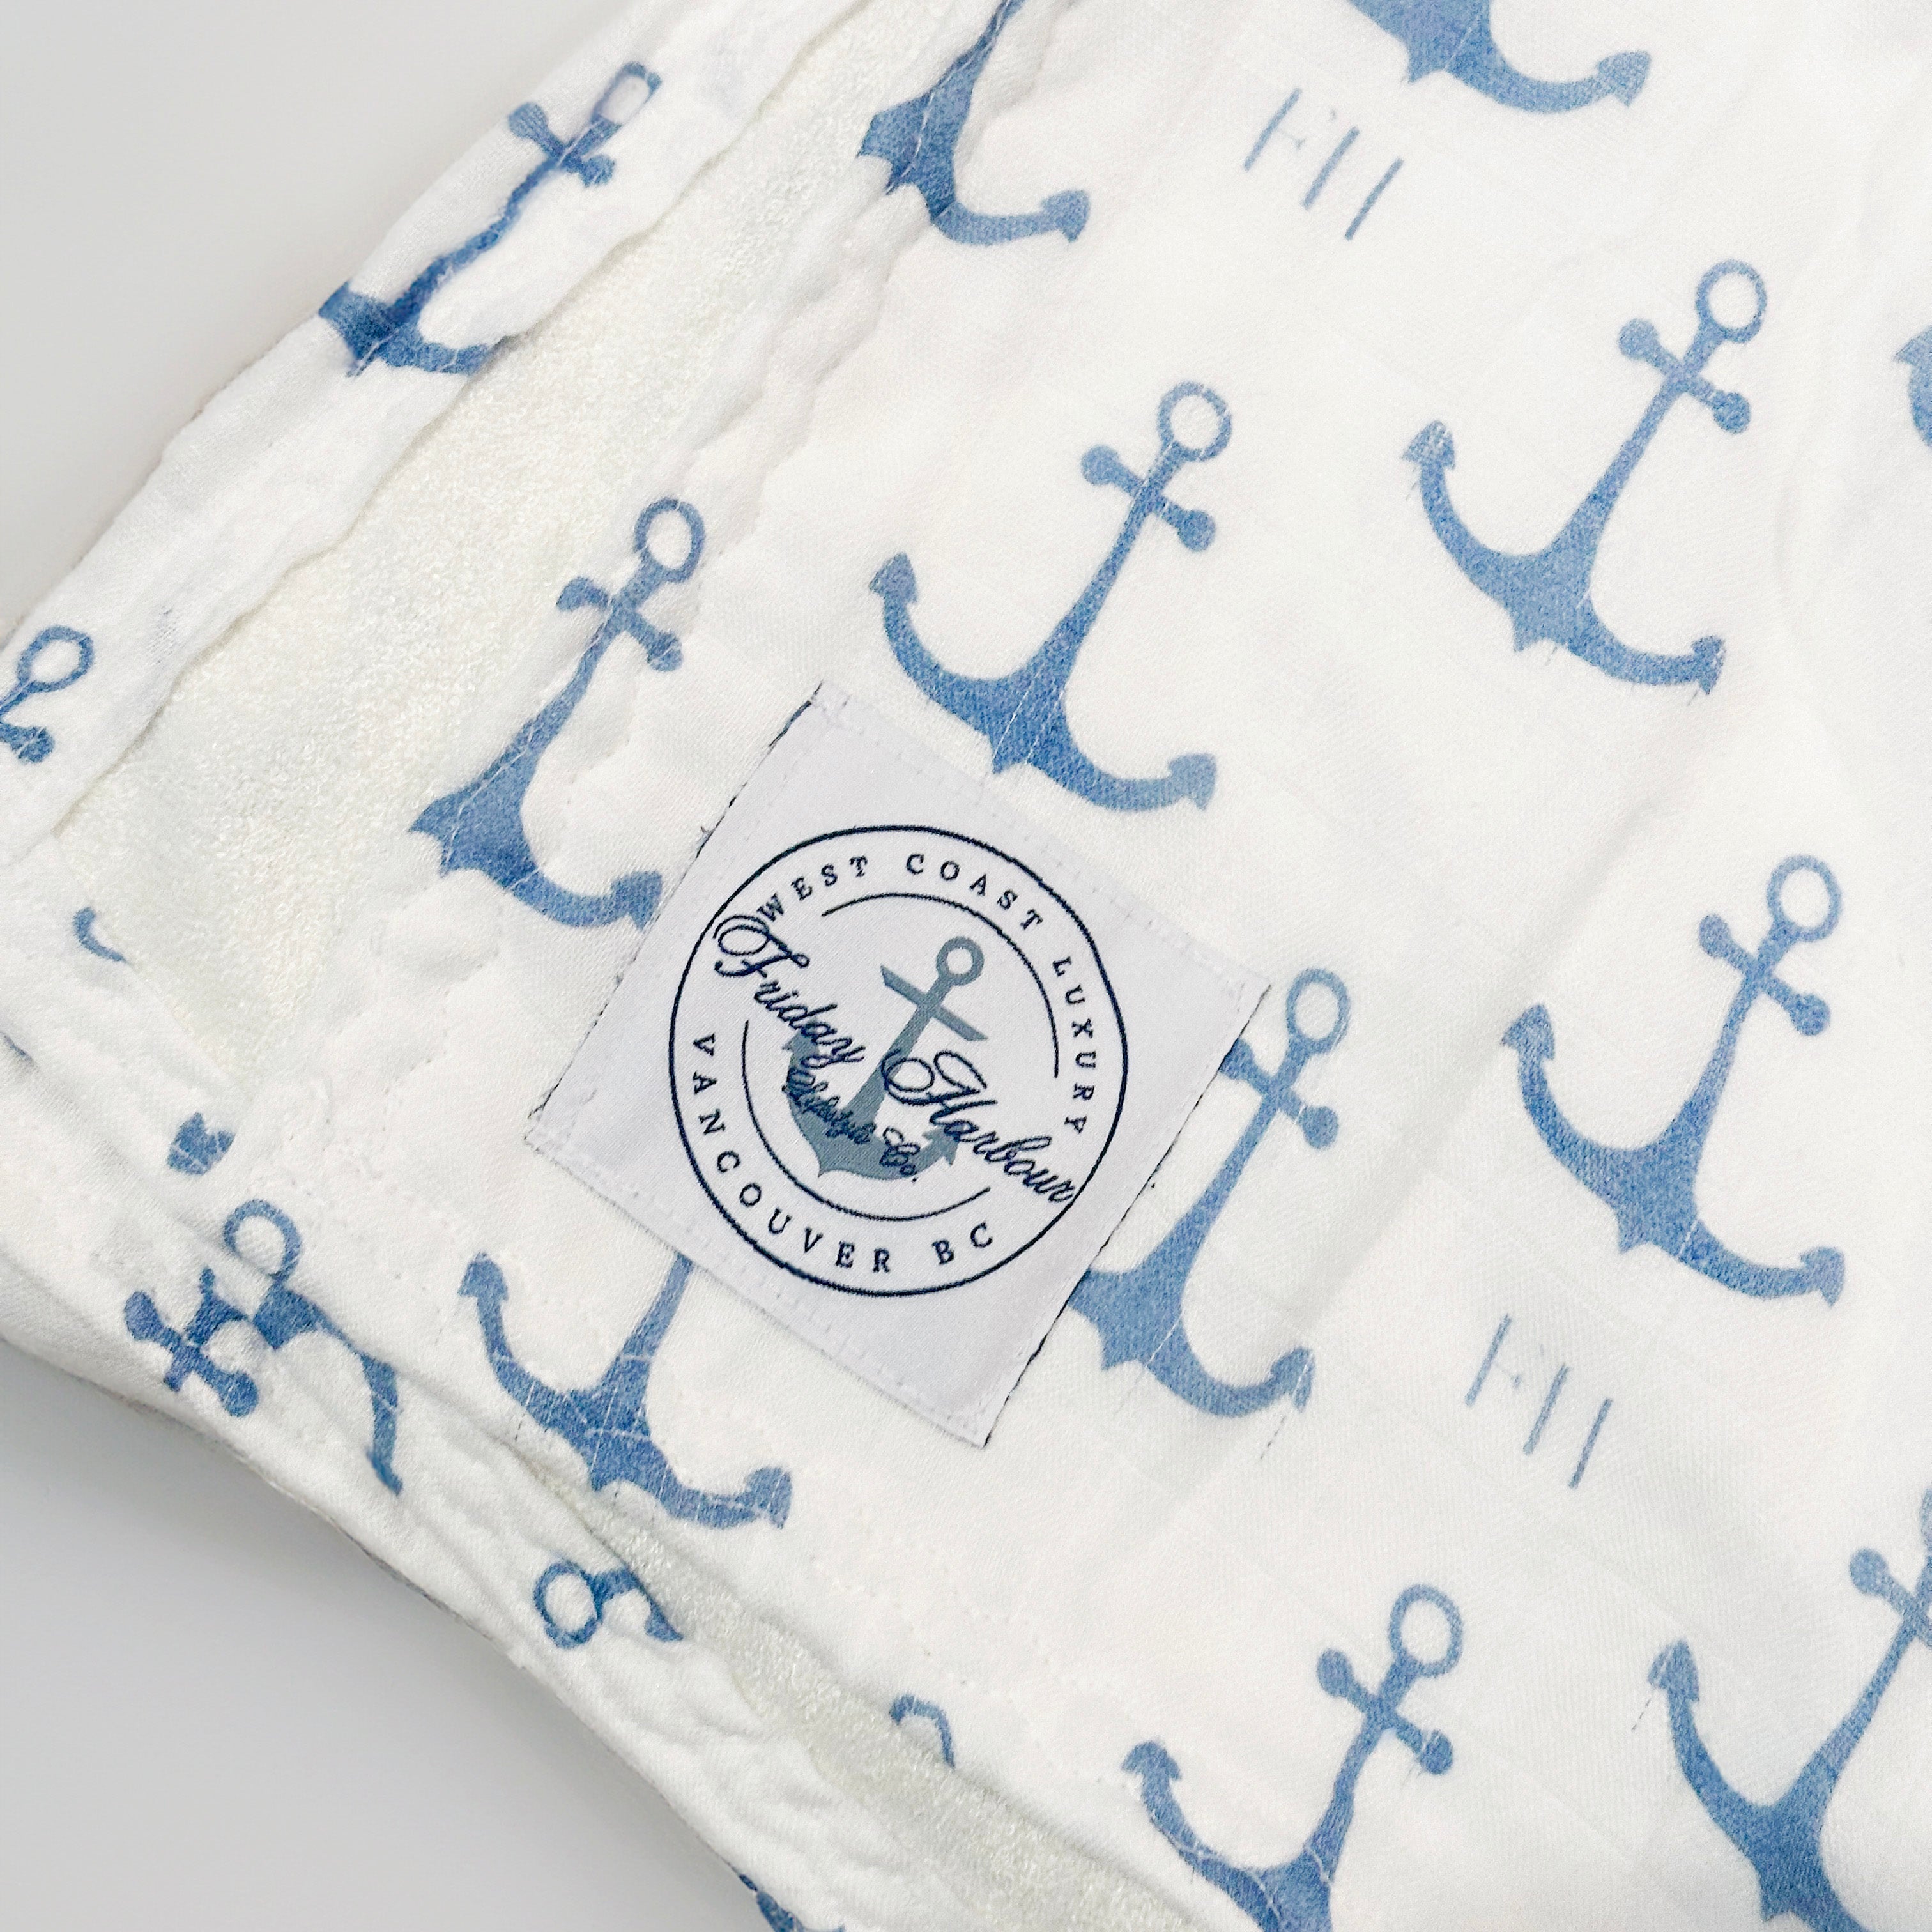 The Kids Cloud Towel - Anchors - Friday Harbour Lifestyle Company 